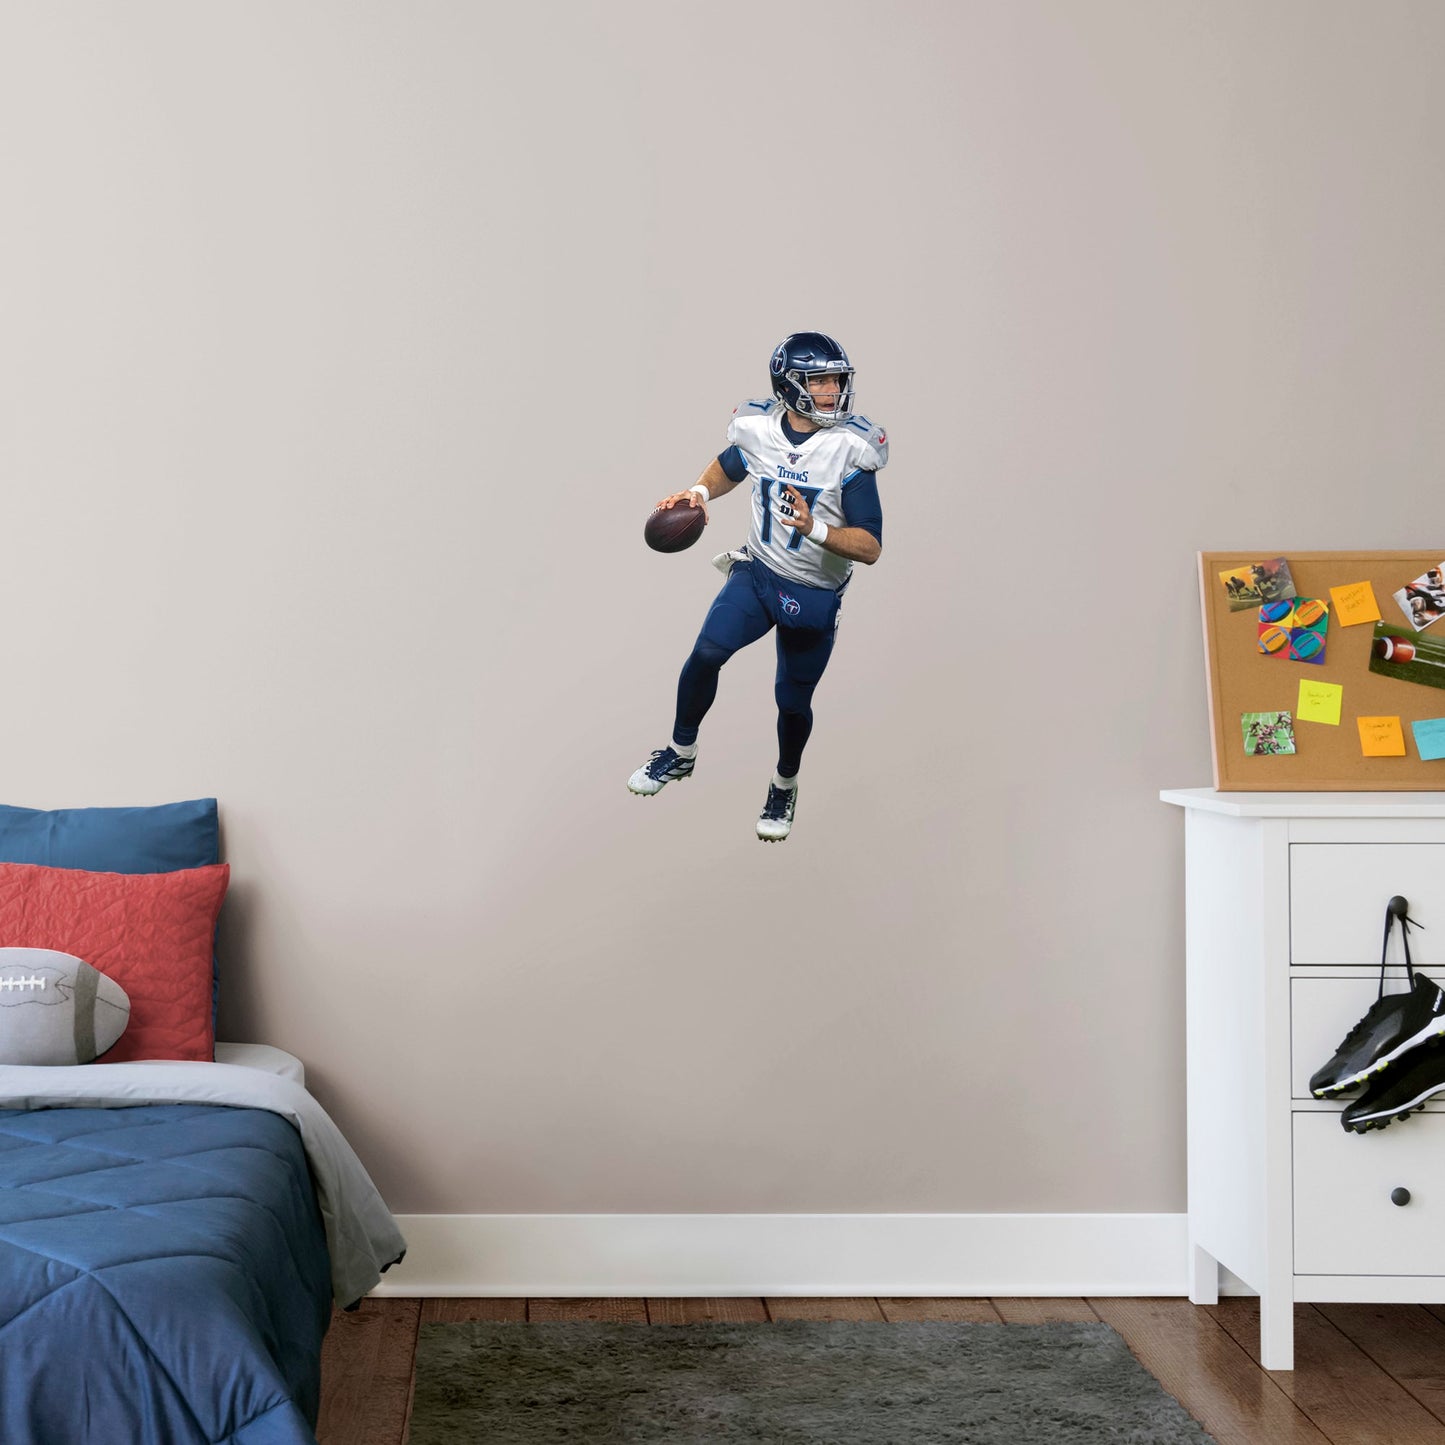 X-Large Athlete + 2 Decals (18"W x 38"H) Show off your support for the NFL 2019 Comeback Player of the Year, Ryan Tannehill, with this officially licensed wall decal of the Tennessee Titan quarterback. Considered one of the best quarterbacks in the NFL, Tannessee is geared up to complete the pass and dominate the AFC South in any bedroom, sports bar, or fan cave with this high-quality wall decal in the iconic Titans navy blue and silver uniform. Nashville isn't just for music, let’s go Titans!